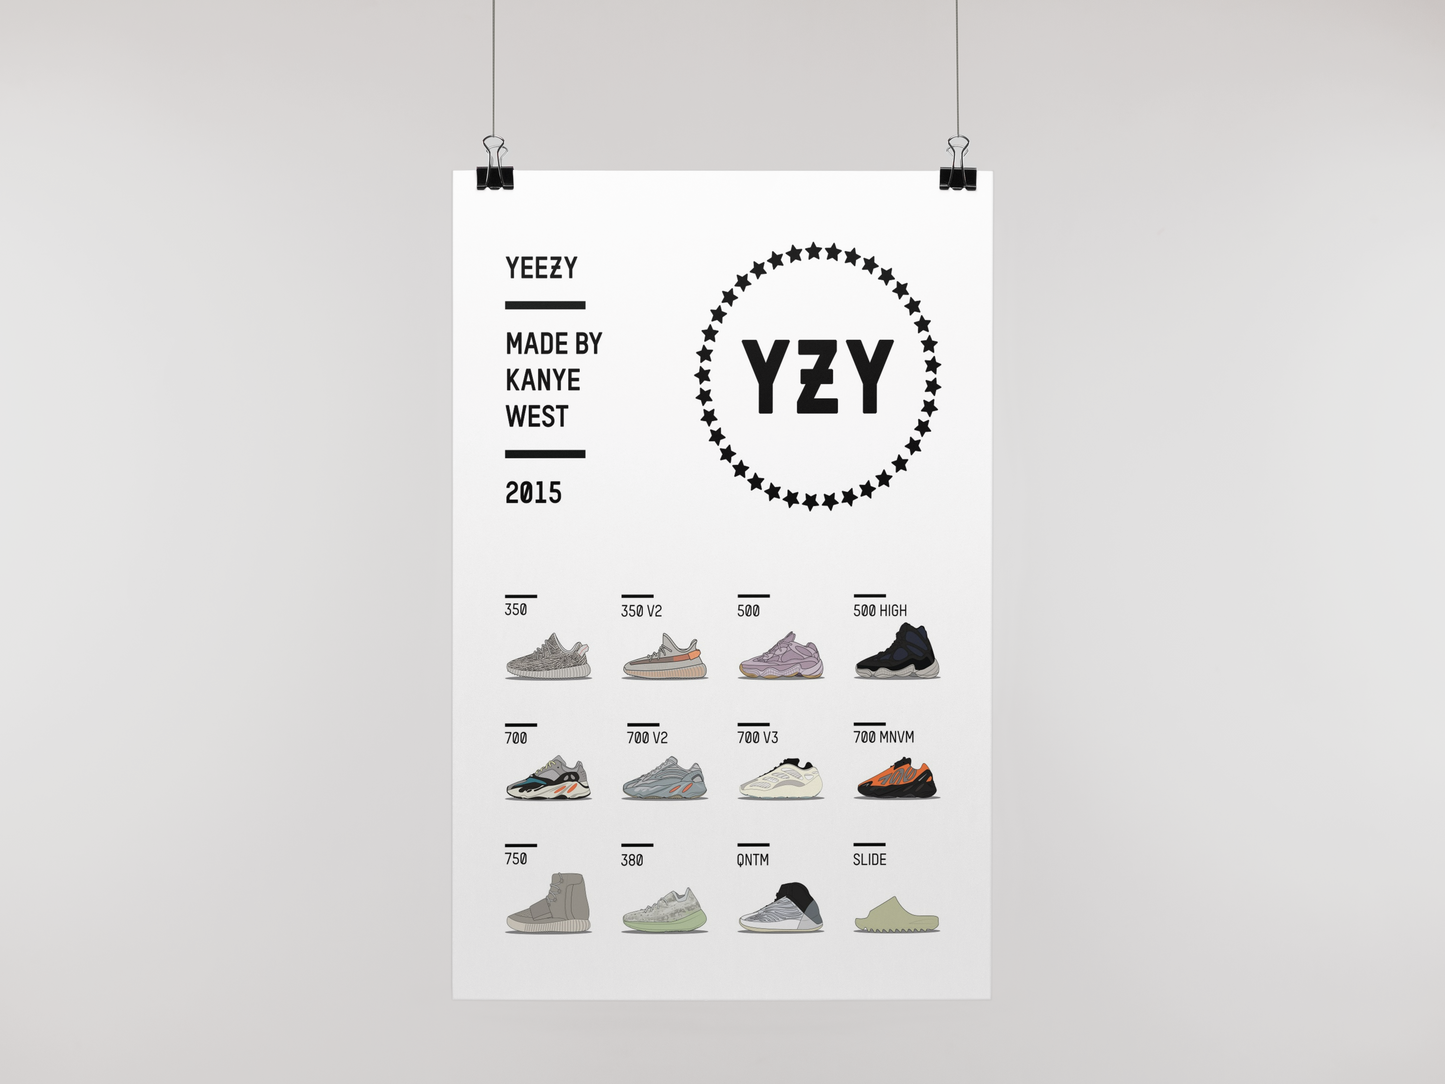 The Yeezy Collection